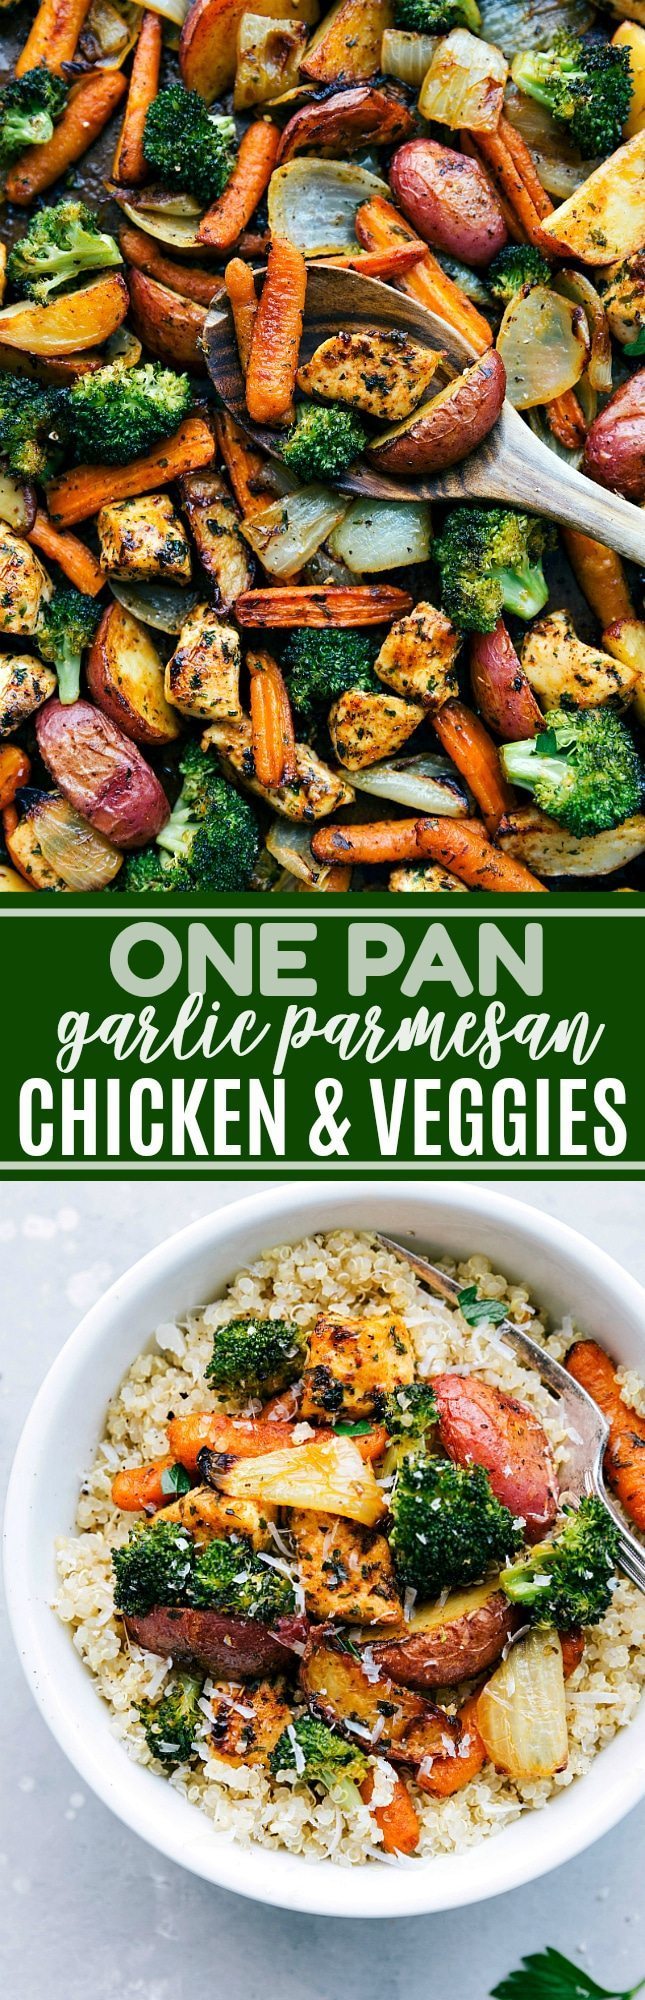 Healthy and delicious Meal Prep!!! ONE PAN Garlic Parmesan Chicken and Veggies. Healthy and hearty! Recipe via chelseasmessyapron.com